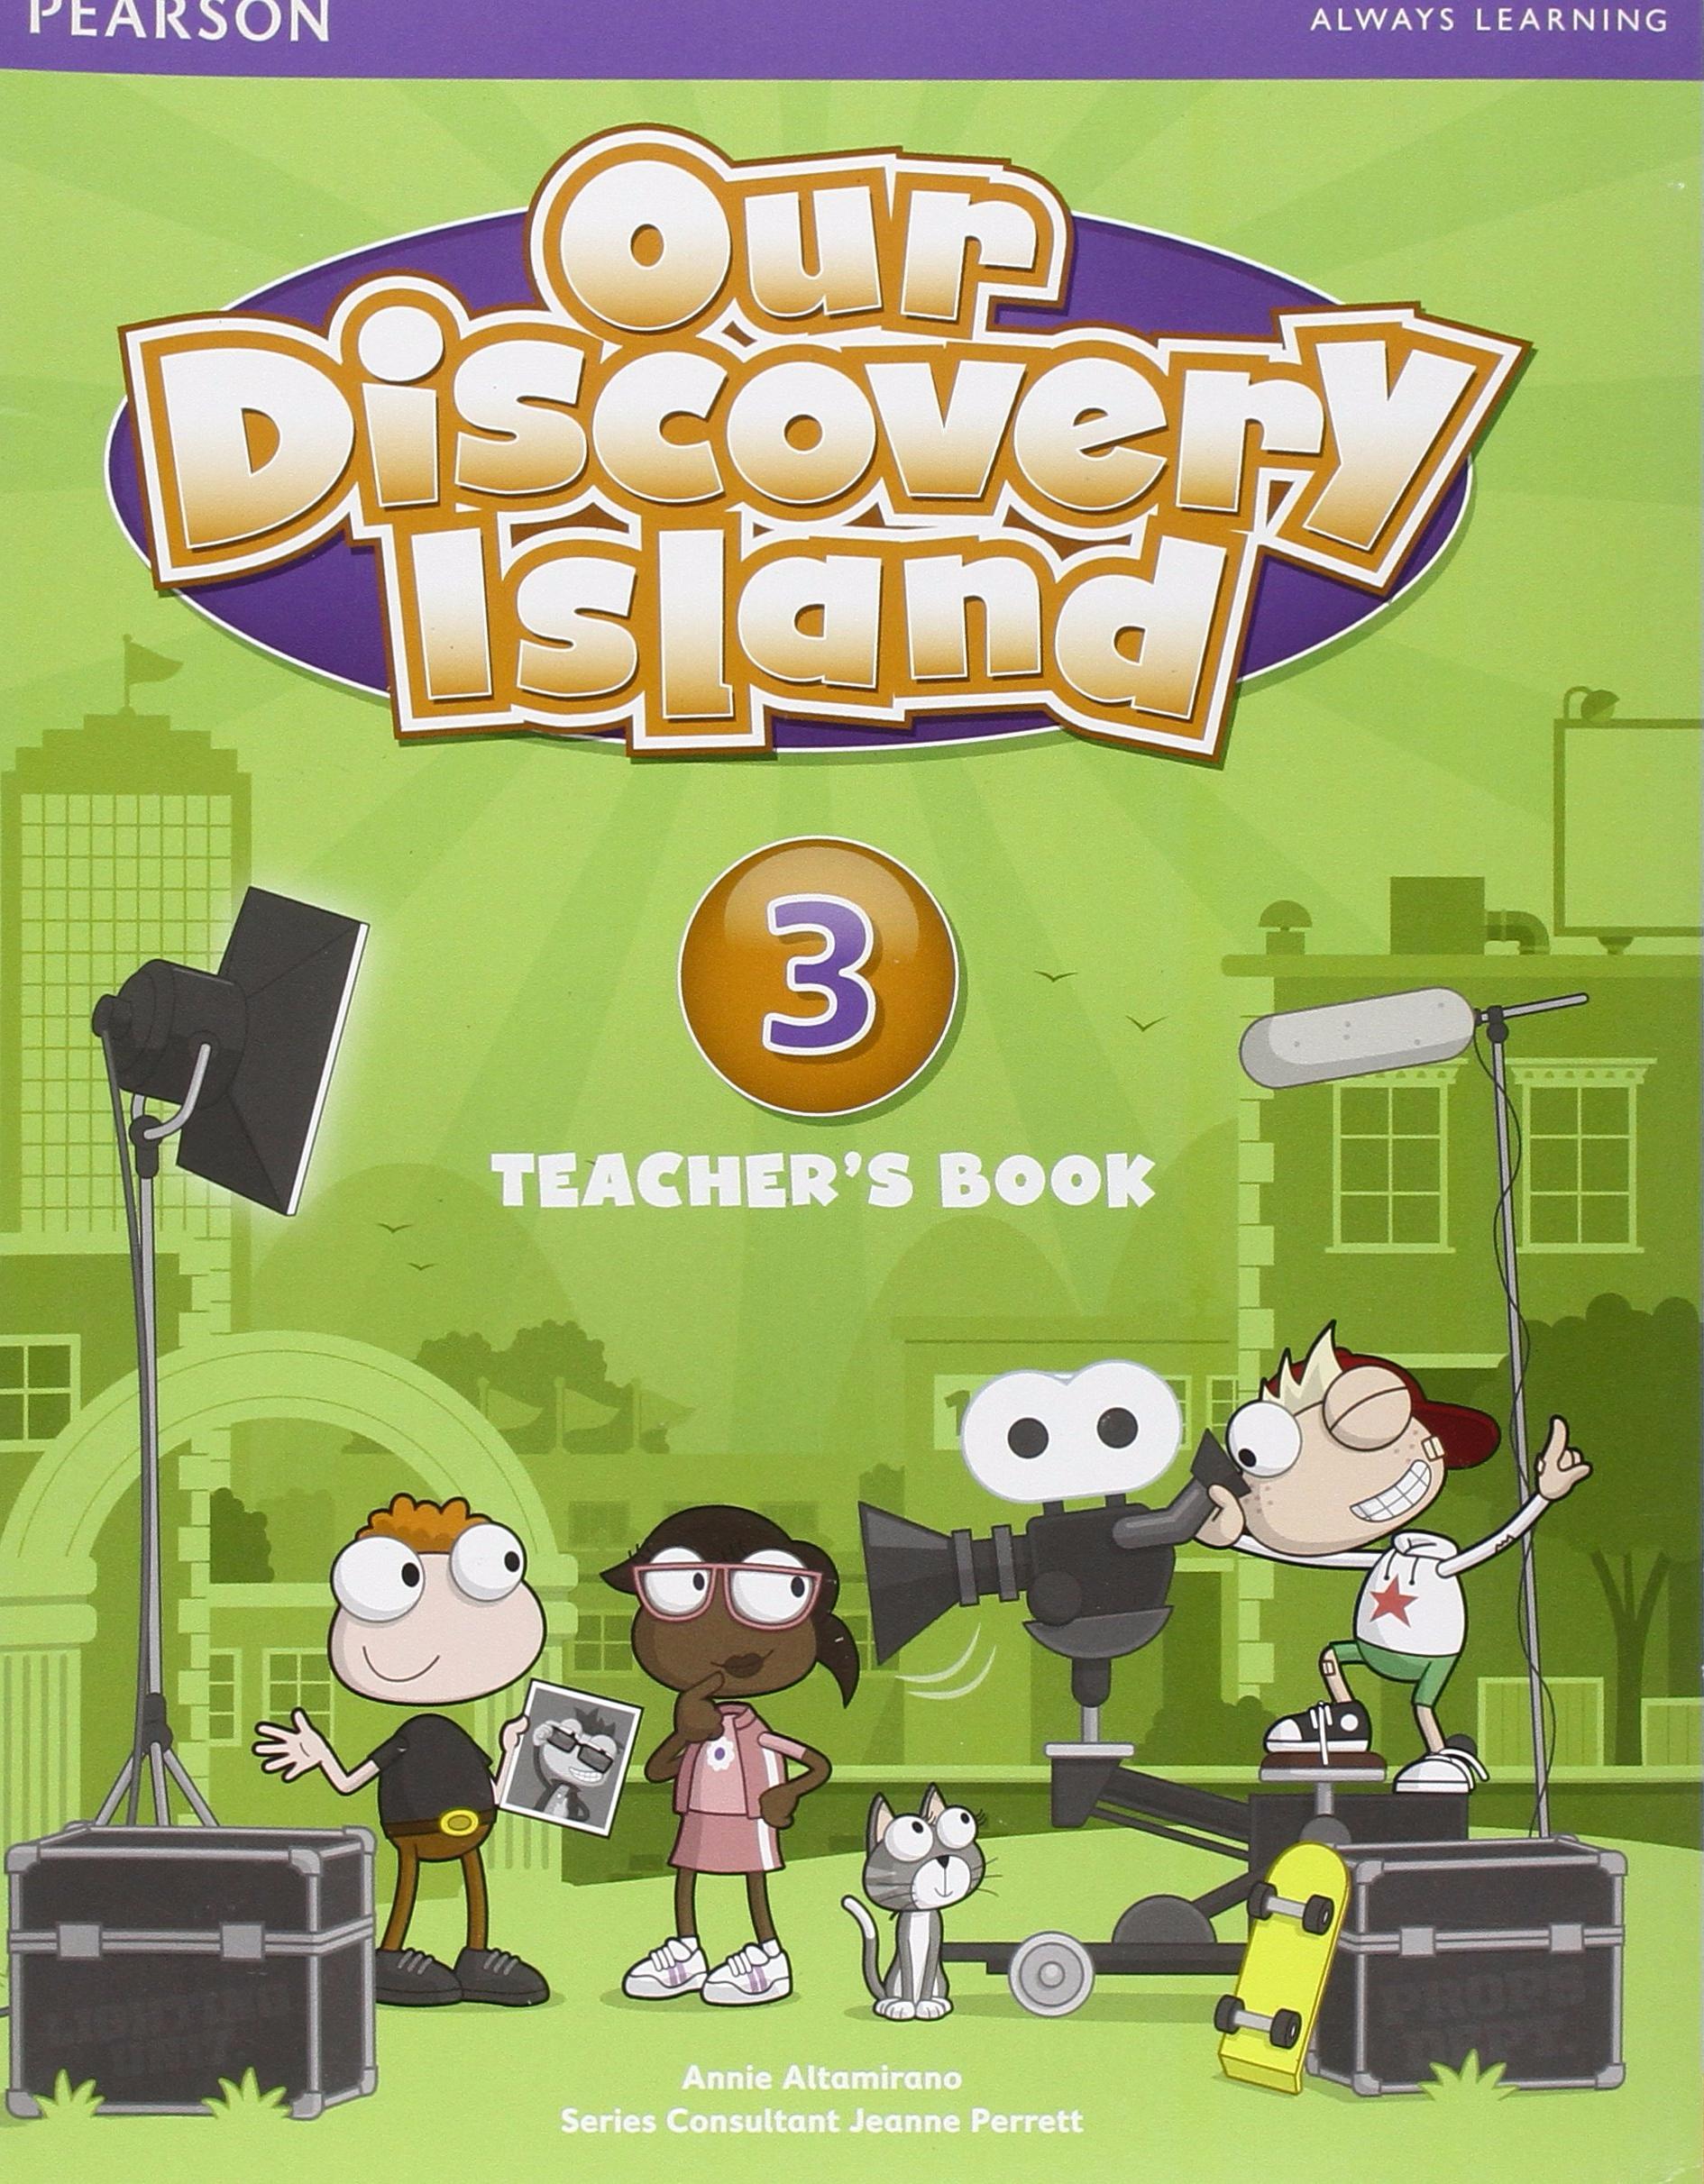 OUR DISCOVERY ISLAND 3 Teacher's Book + Pin Code